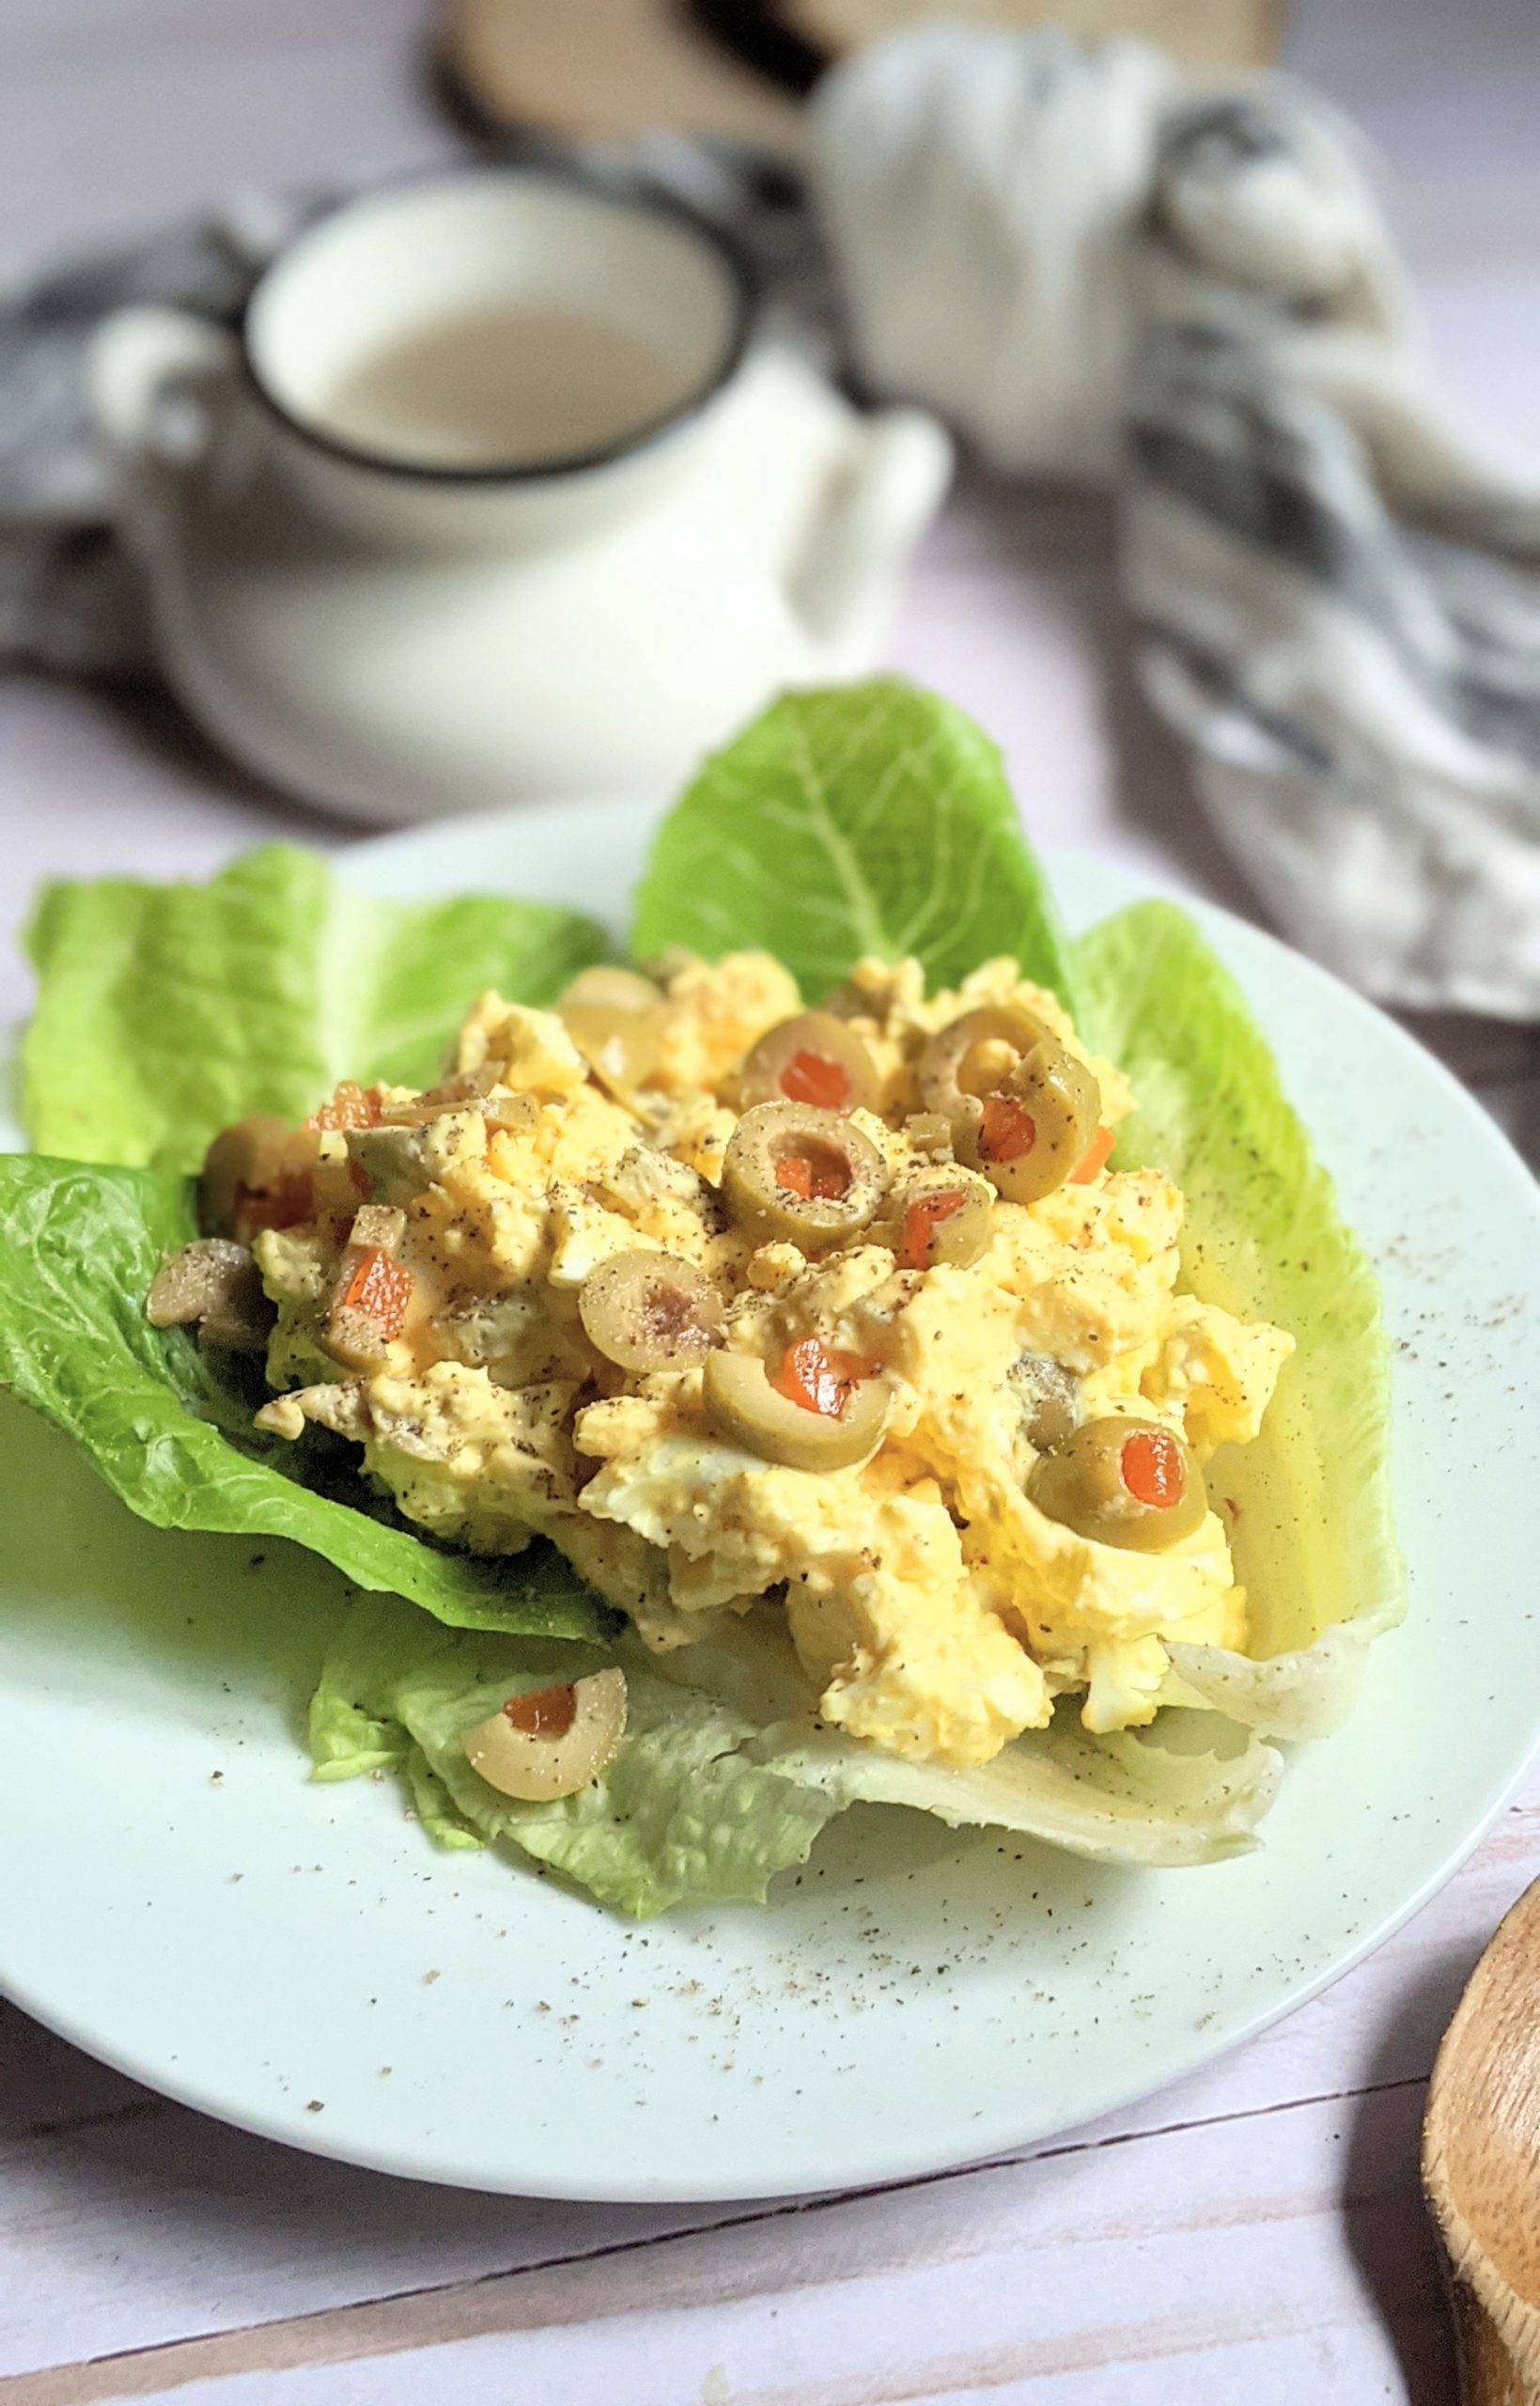 low carb olive egg salad recipe with olives fun twist on egg salad with green olives keto low carb